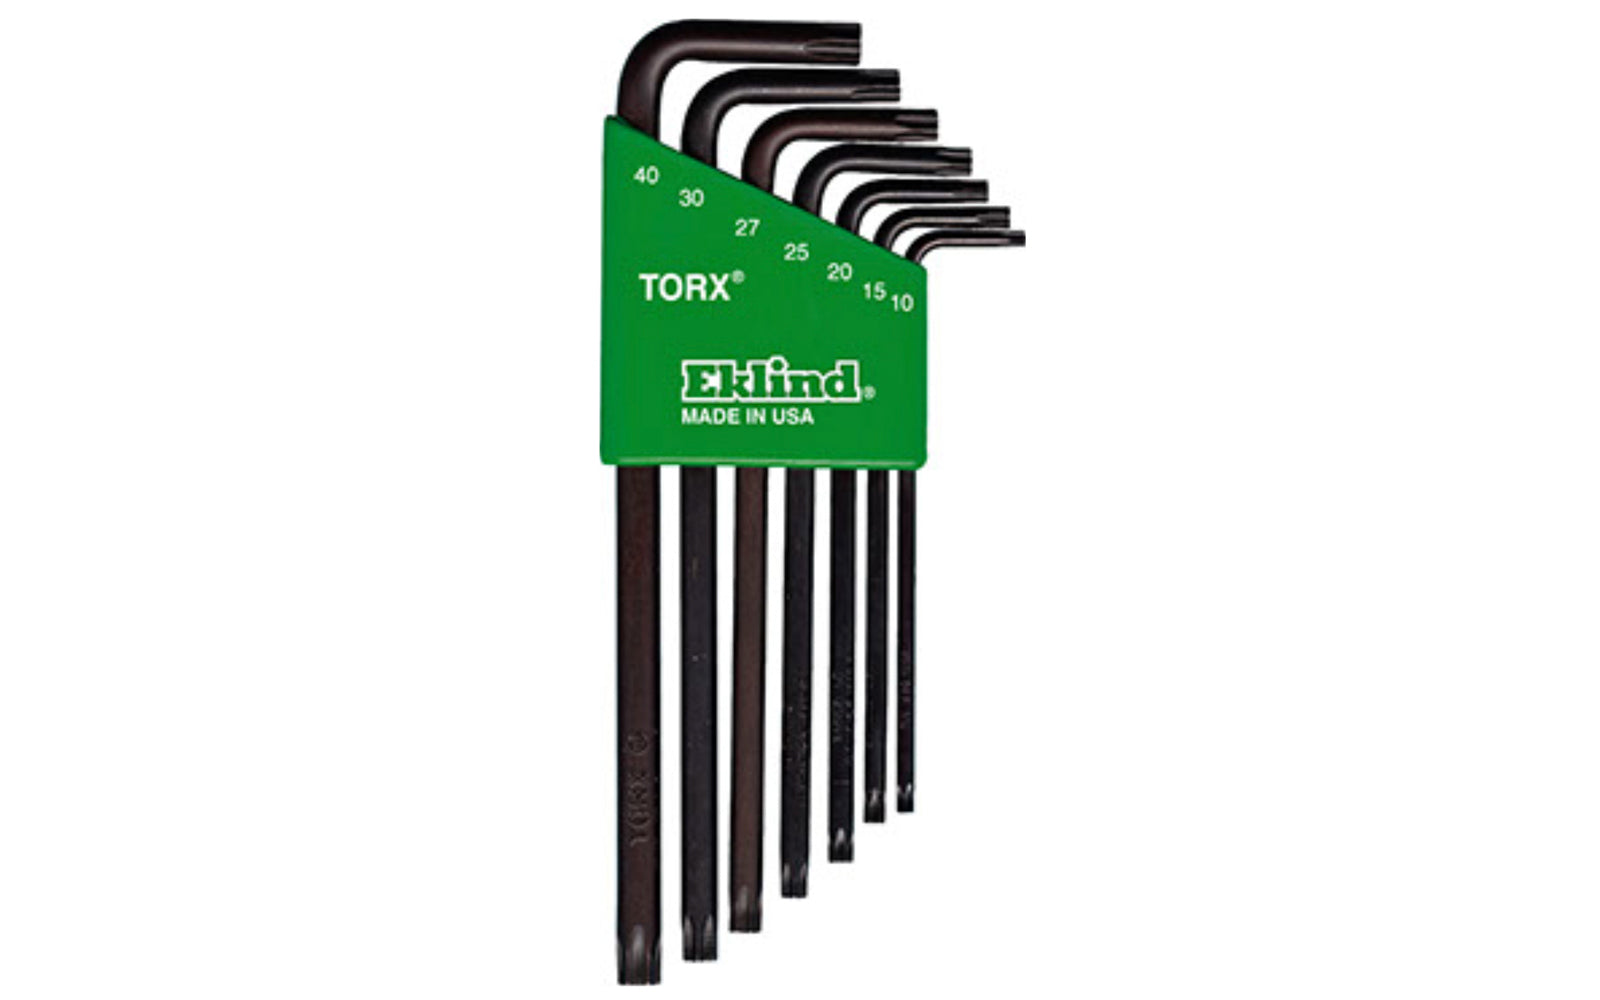 Eklind 7-PC Torx-L Wrench Key Set - Security Torx. T10, T15, T20, T25, T27, T30, T40 sizes. Allen wrench set is manufactured using the finest quality alloy steel. It is hardened, tempered & finished with Eklind black finish to resist rust. Plastic holder firmly retains each key. Eklind model 10707. Made in USA.